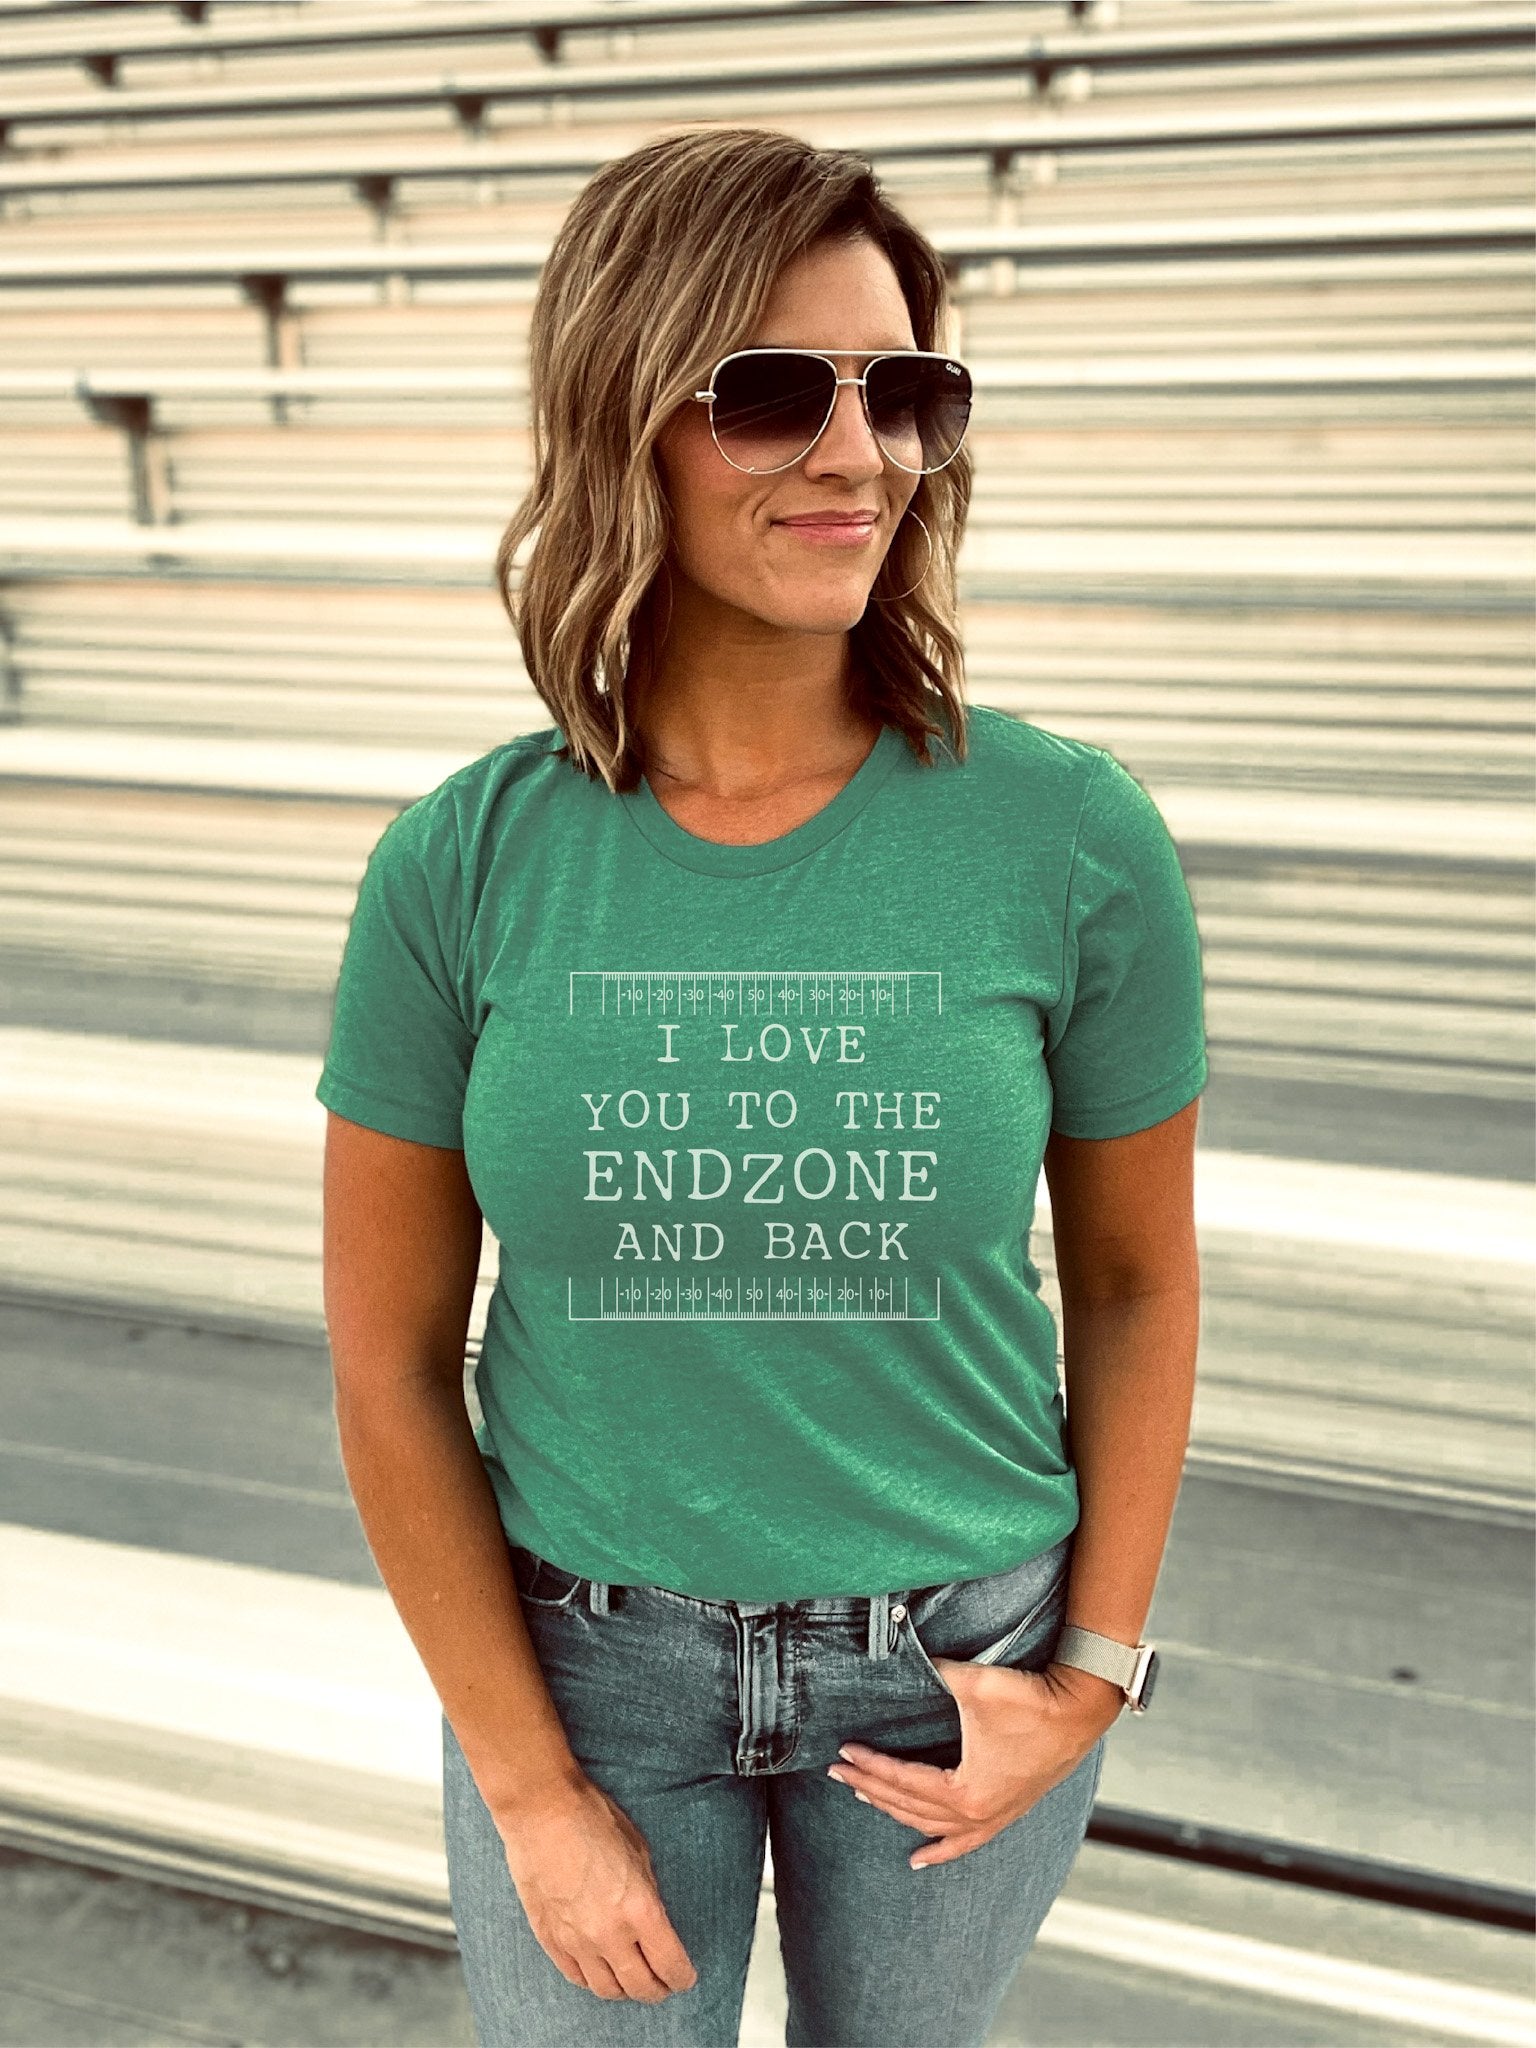 Love you to the endzone tee Short sleeve football tee Bella canvas and Next Level 